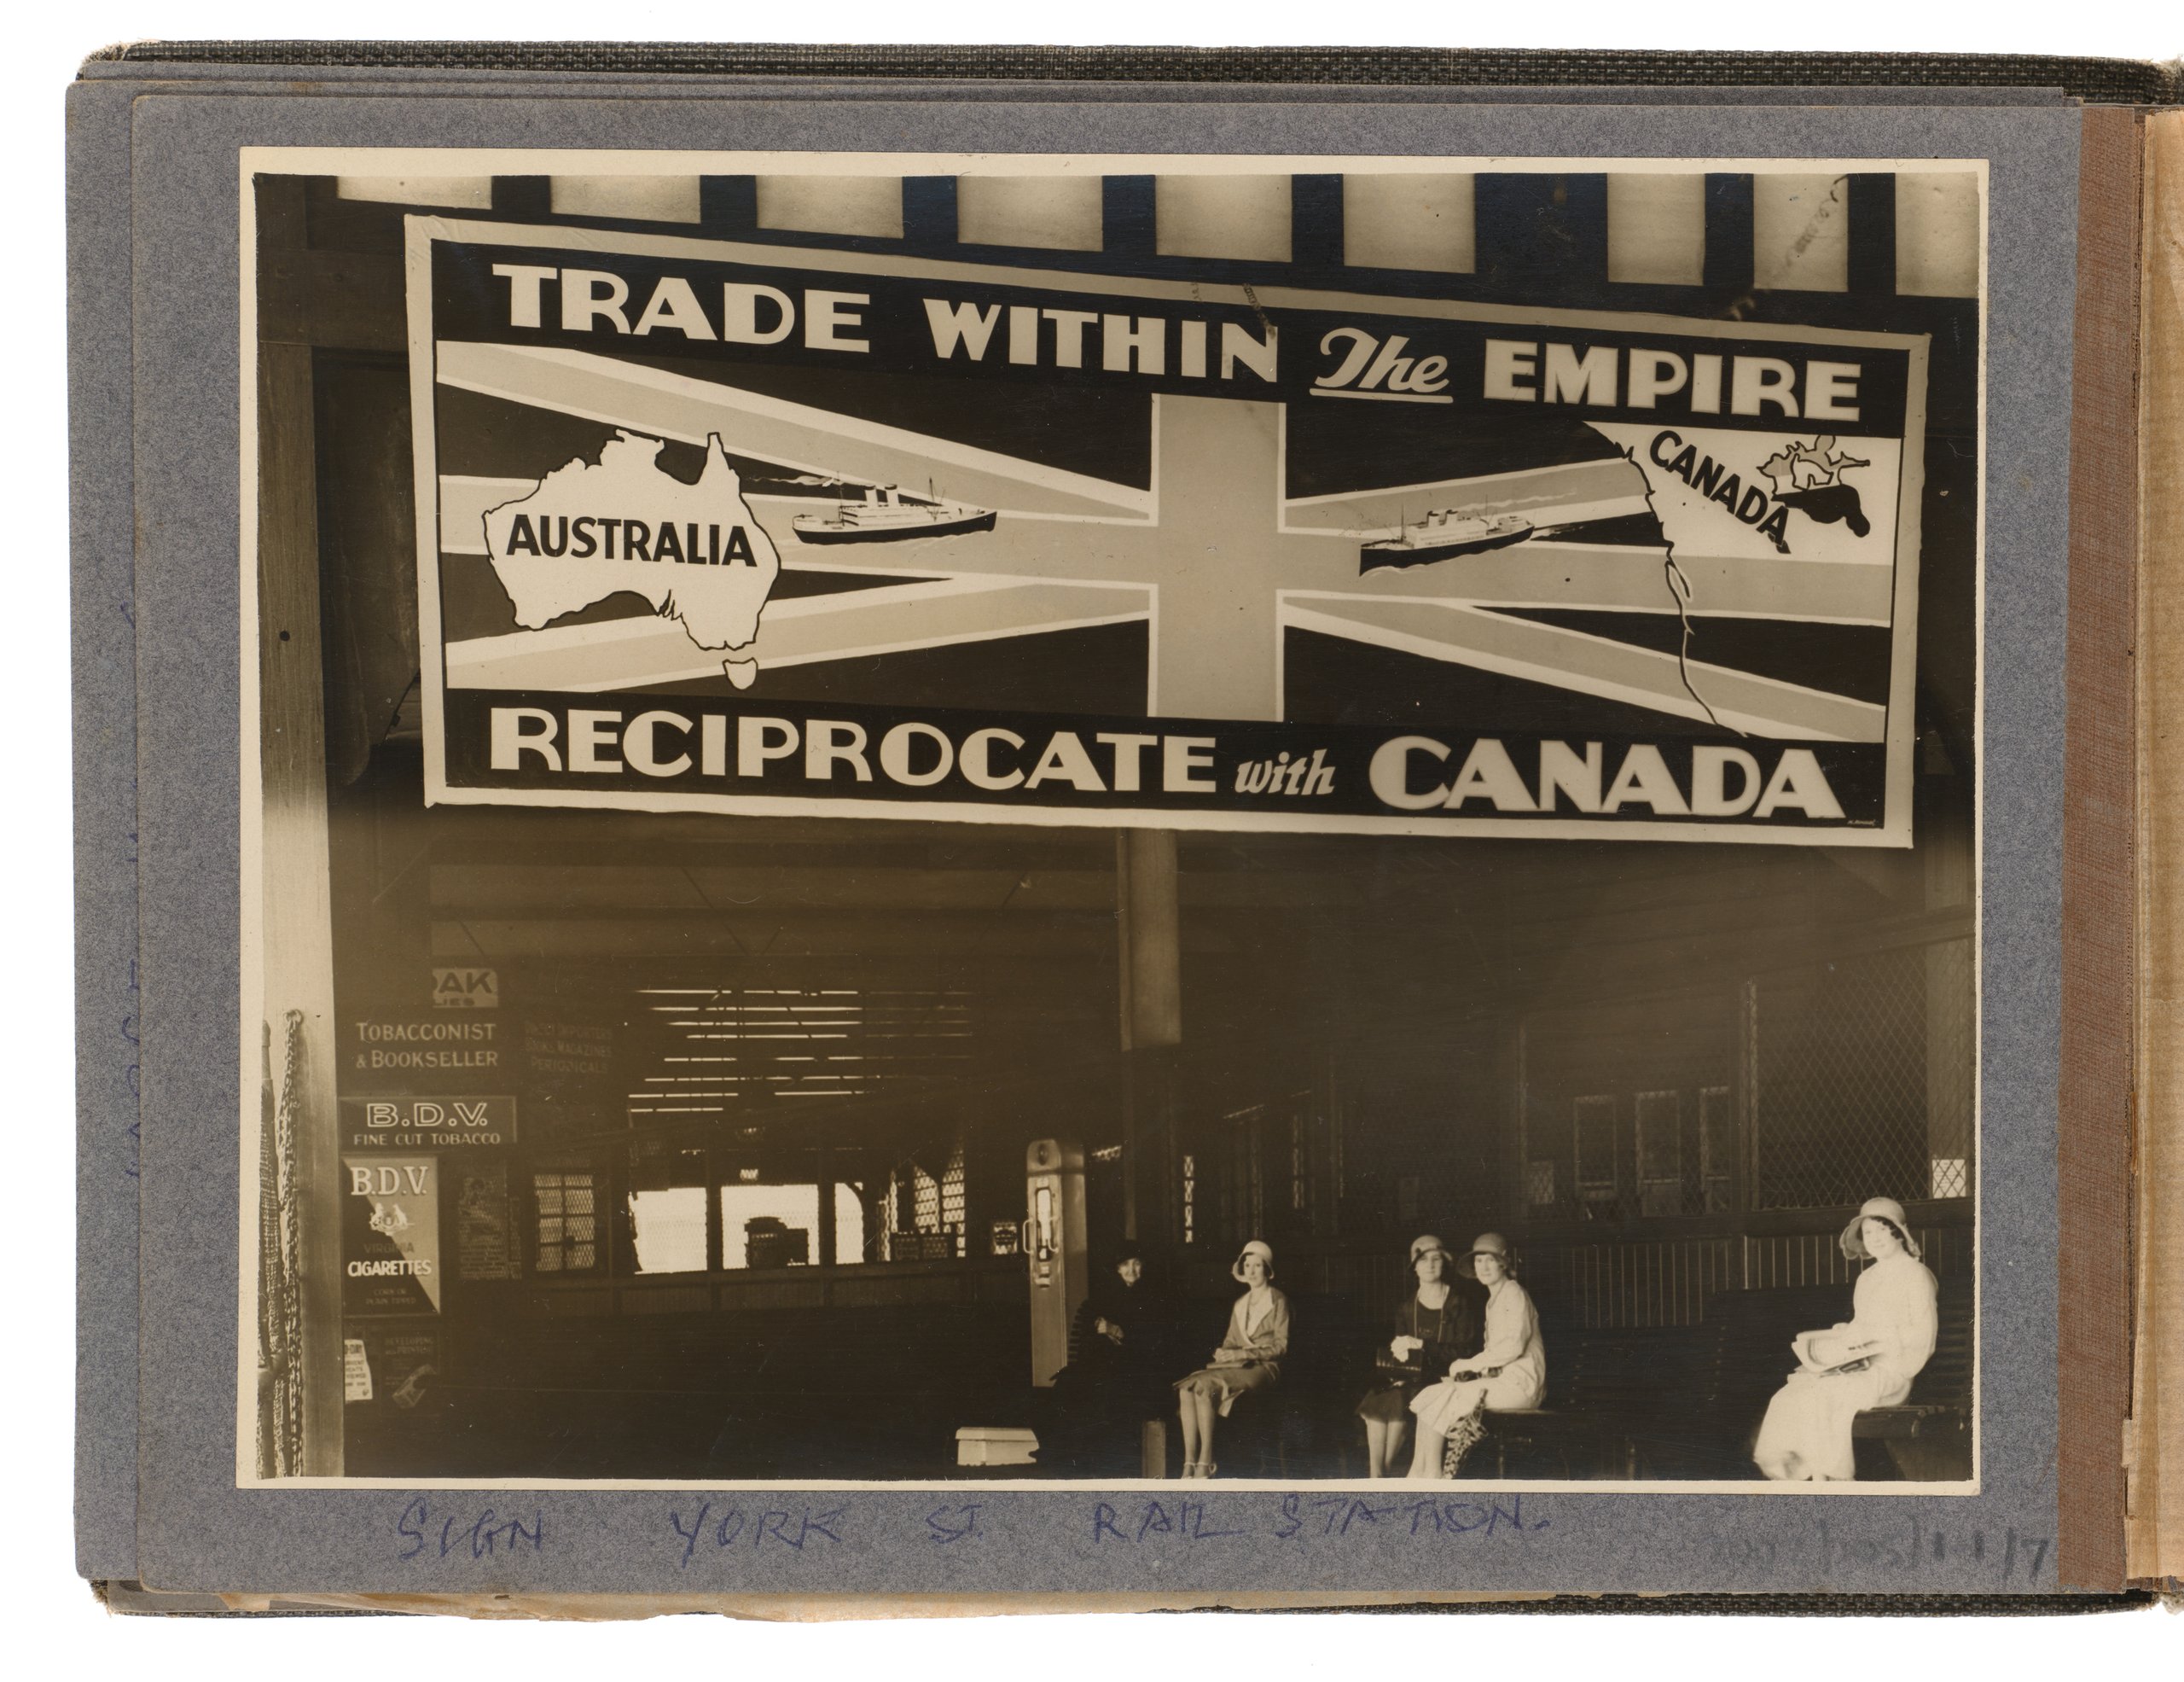 Photograph of advertising billboard at Wynyard Railway Station promoting trade between Australia and Canada